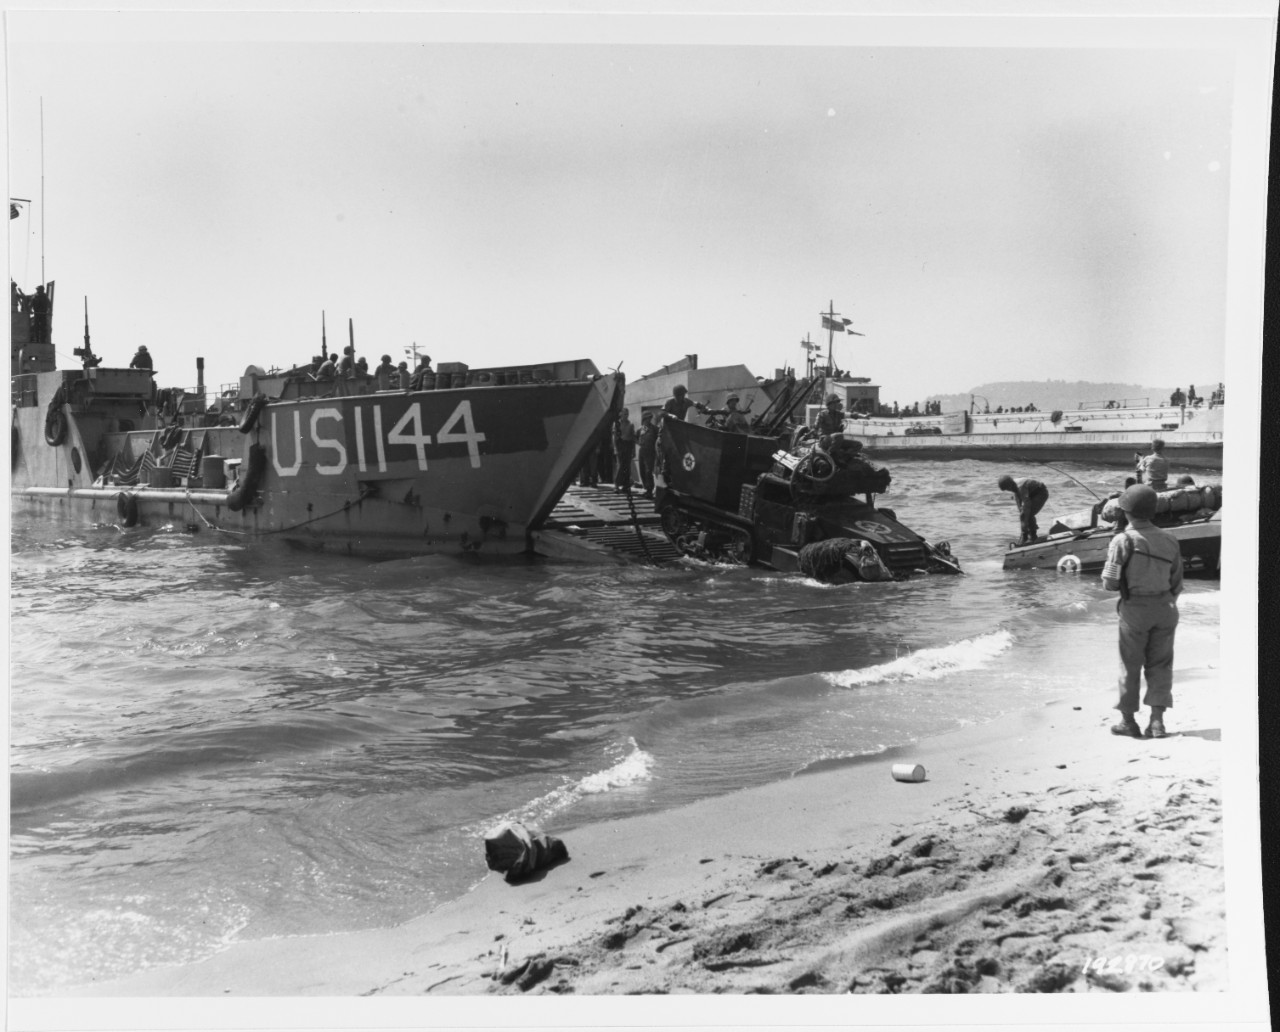 Southern France Invasion, August 1944. Anti-aircraft machine gun half-track comes ashore from USS LCT-1144